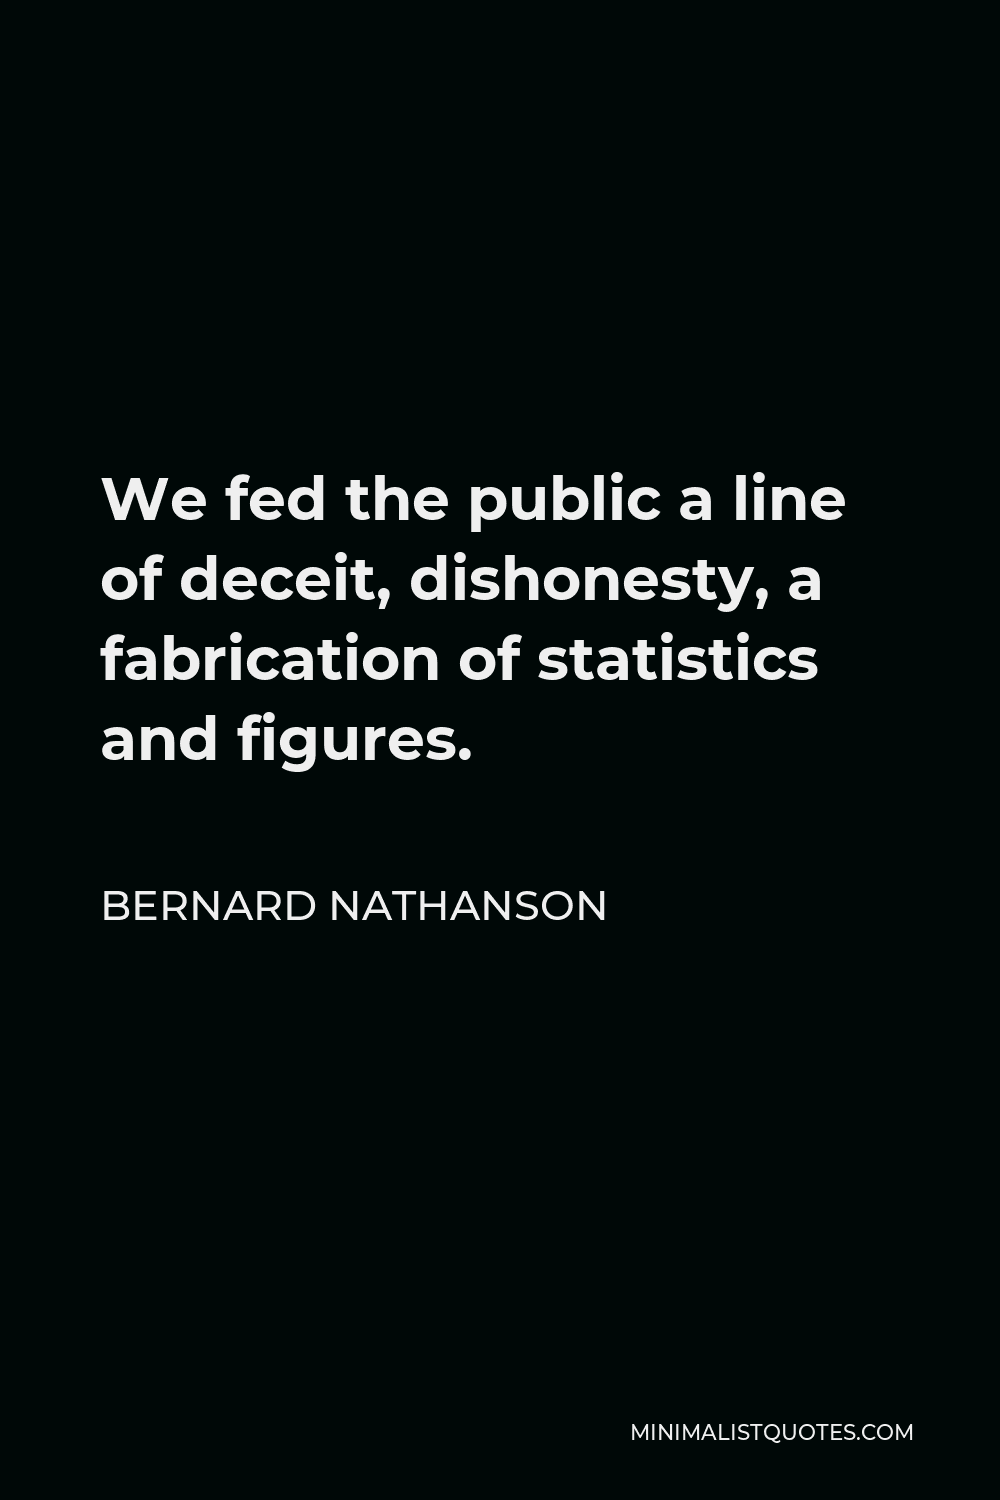 Bernard Nathanson Quote - We fed the public a line of deceit, dishonesty, a fabrication of statistics and figures.